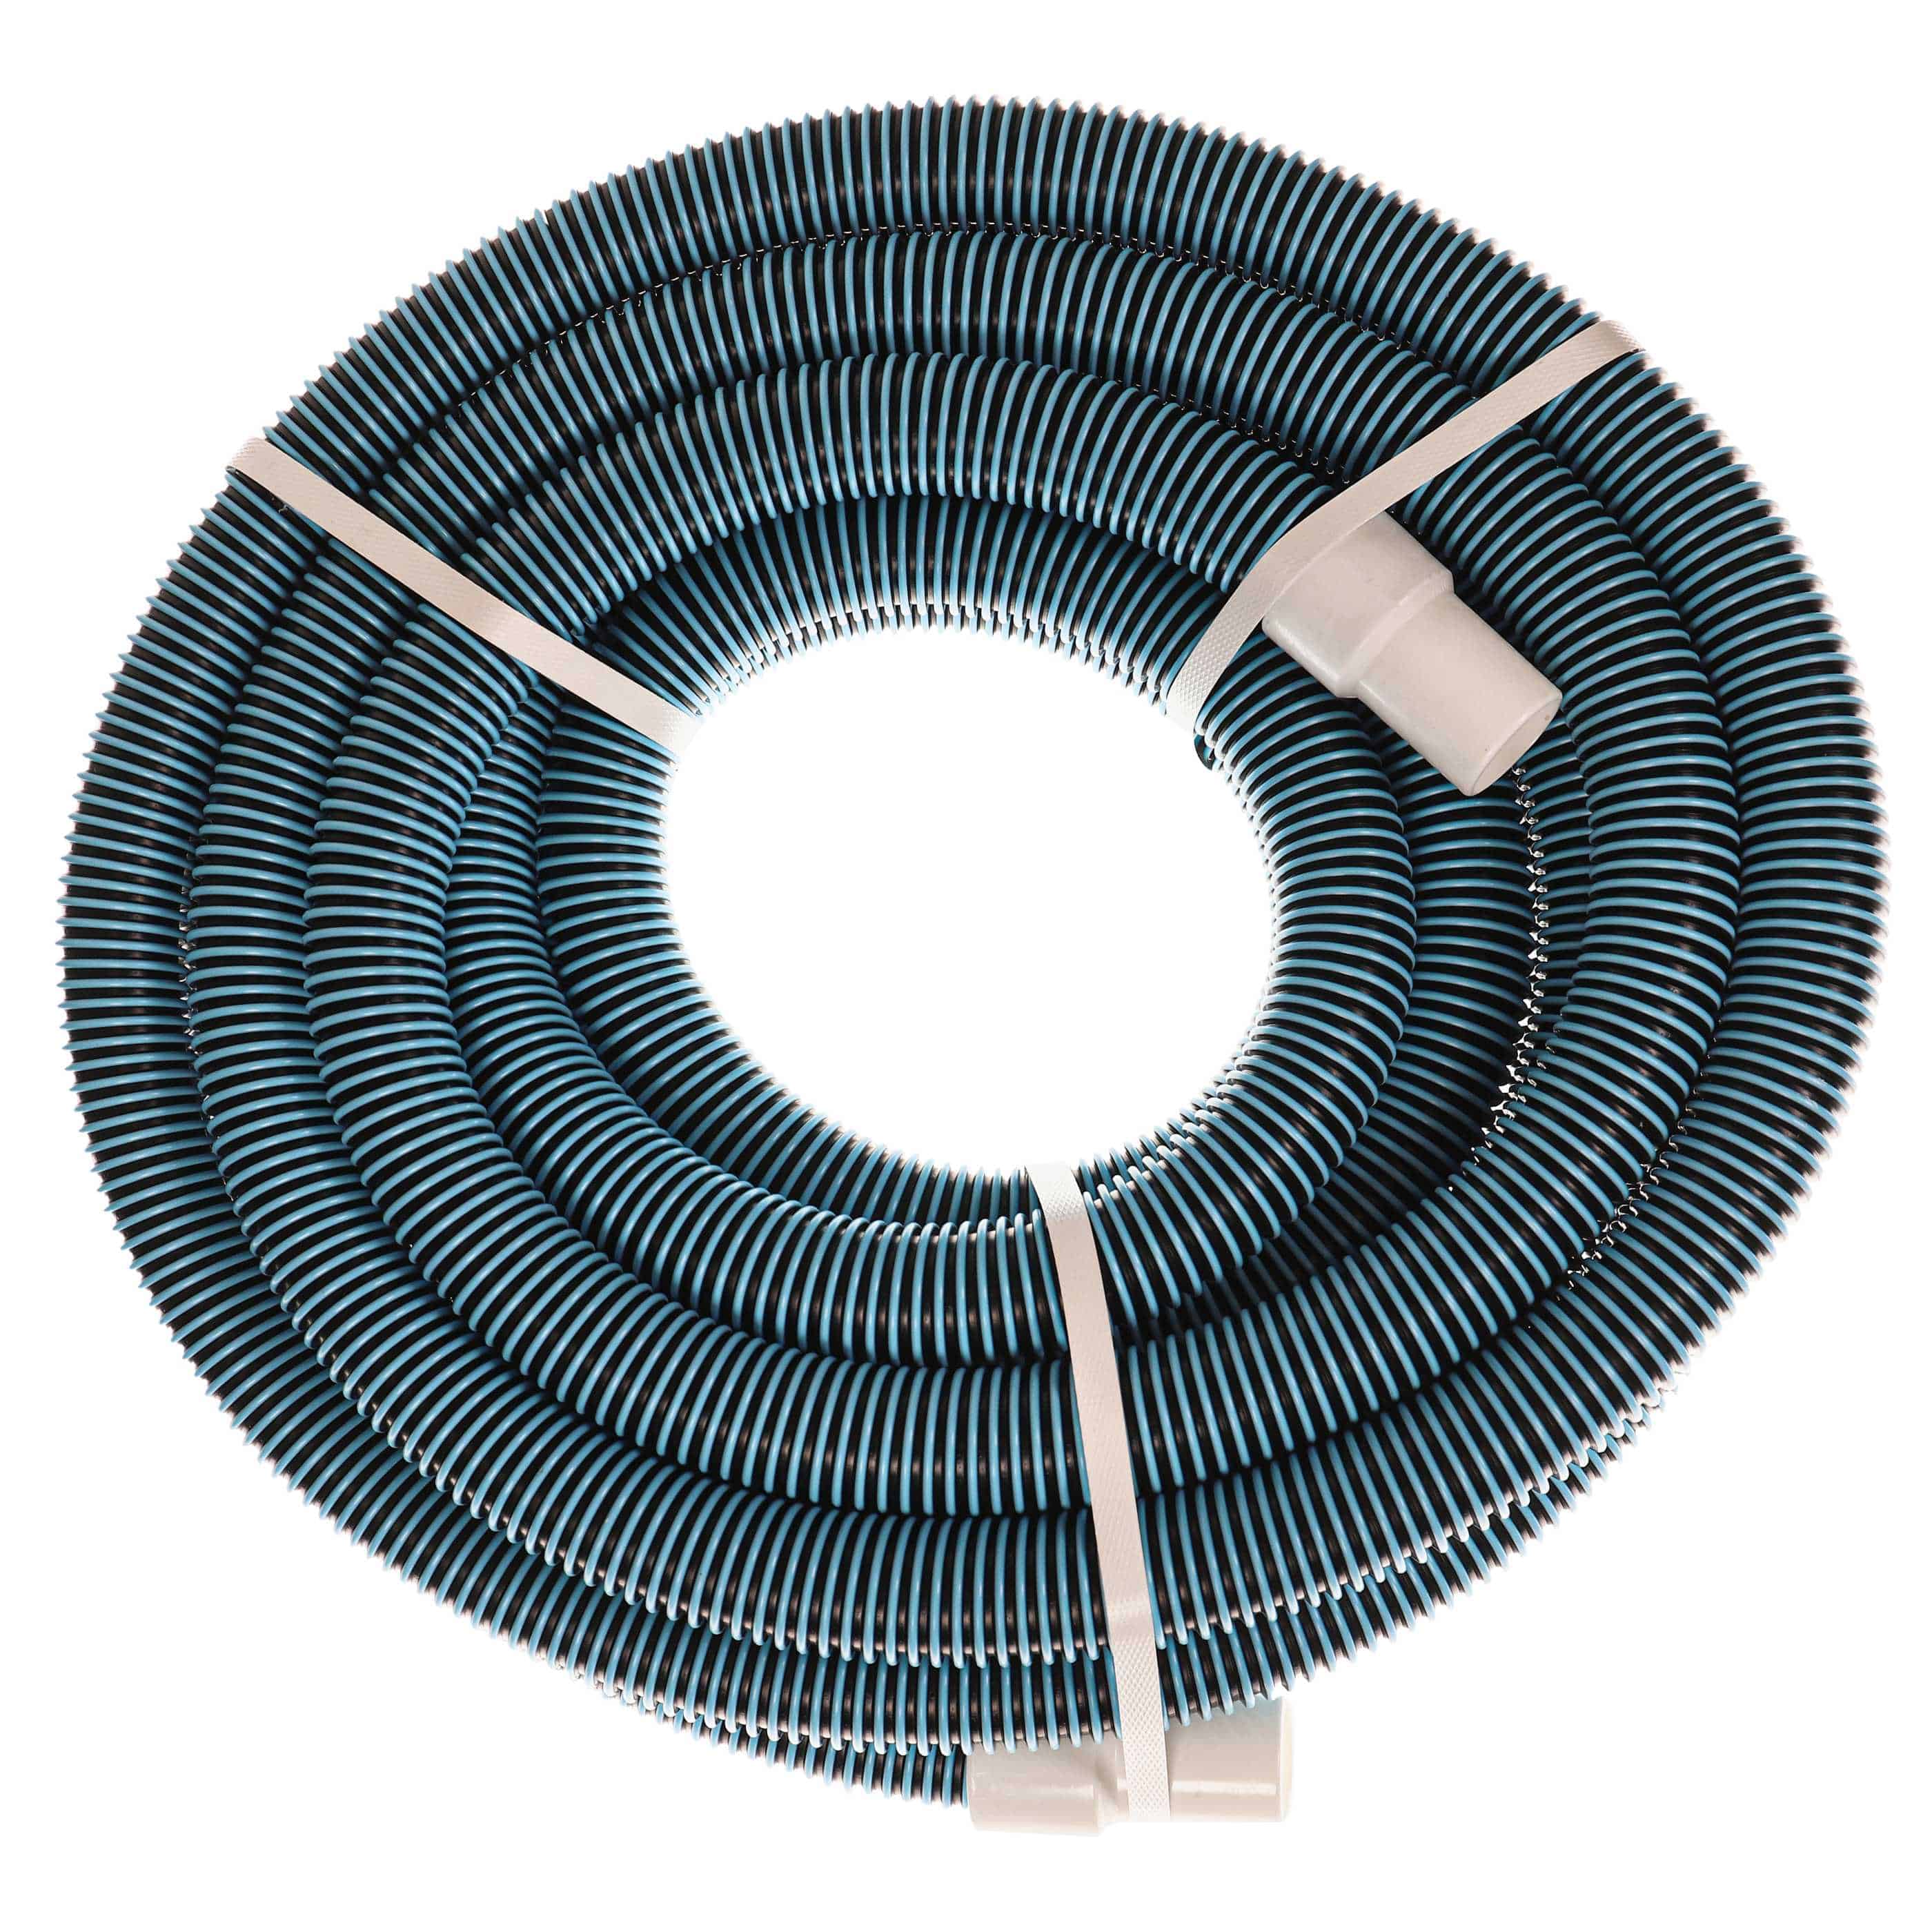 Hose Pipe suitable for Skimmer, Filter, Pool Cleaner Robot - connector 32 mm, 11 m